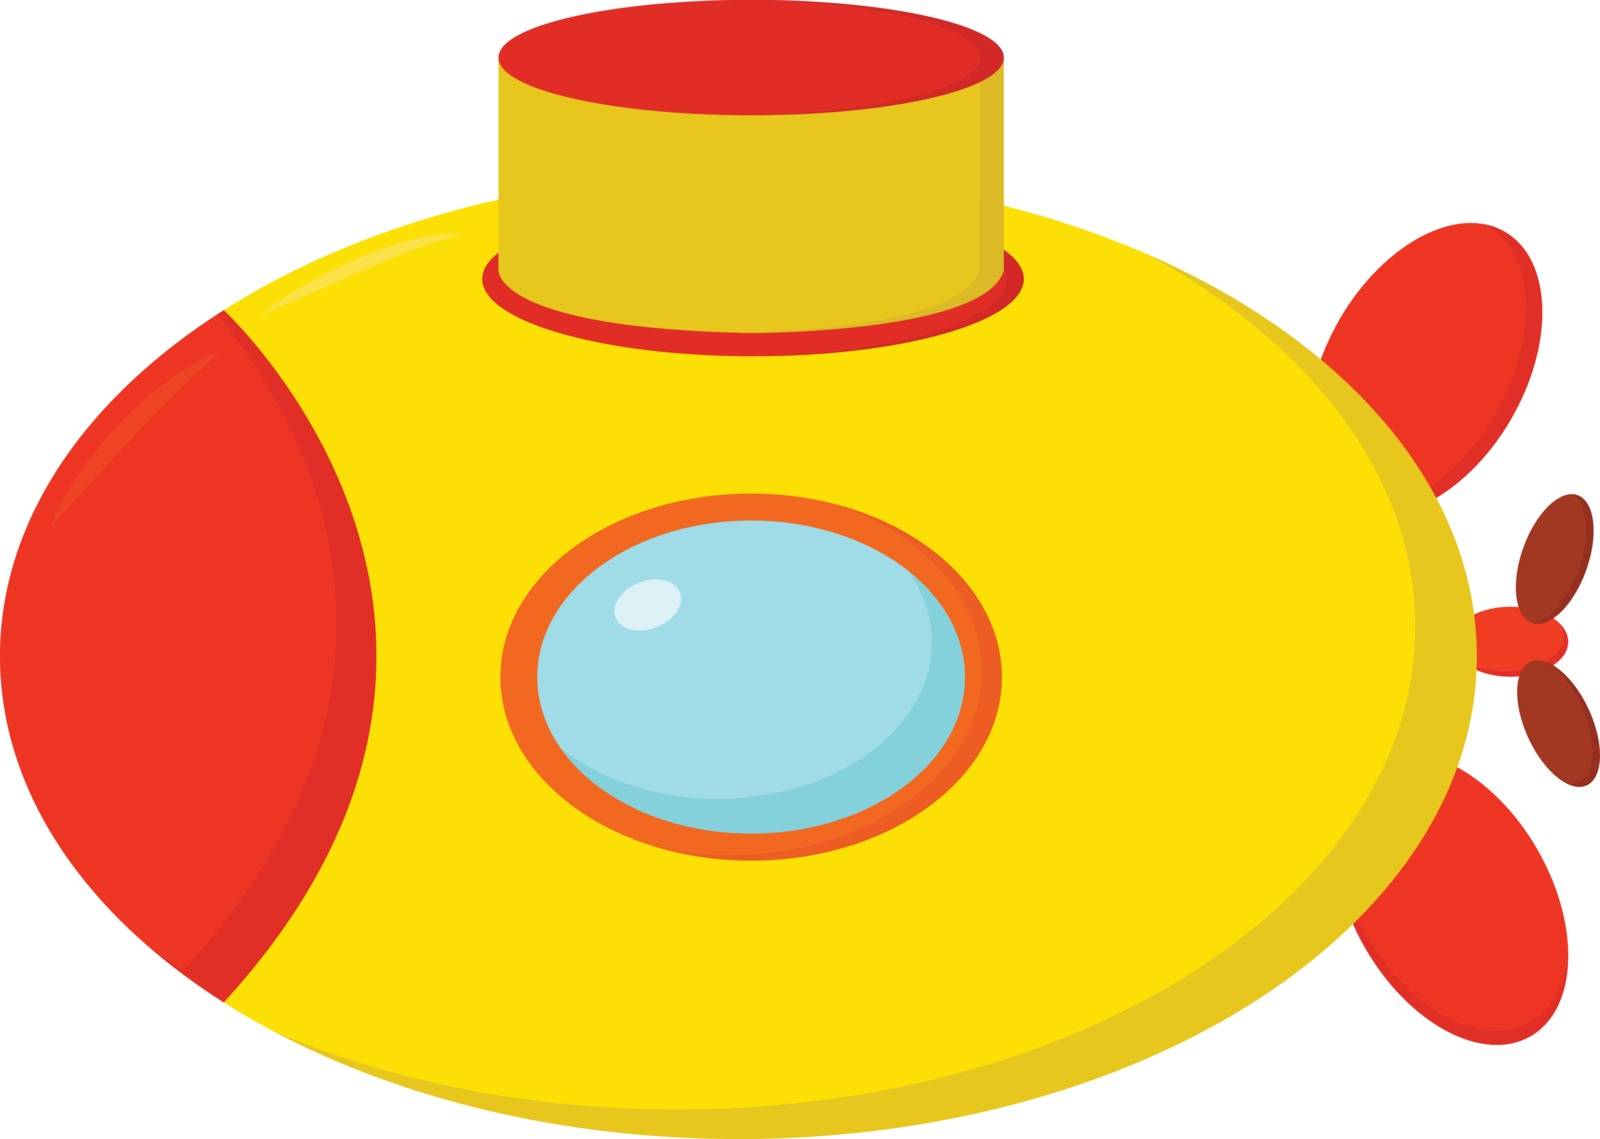 A cute little orange and yellow cartoon submarine vector or colo by Morphart